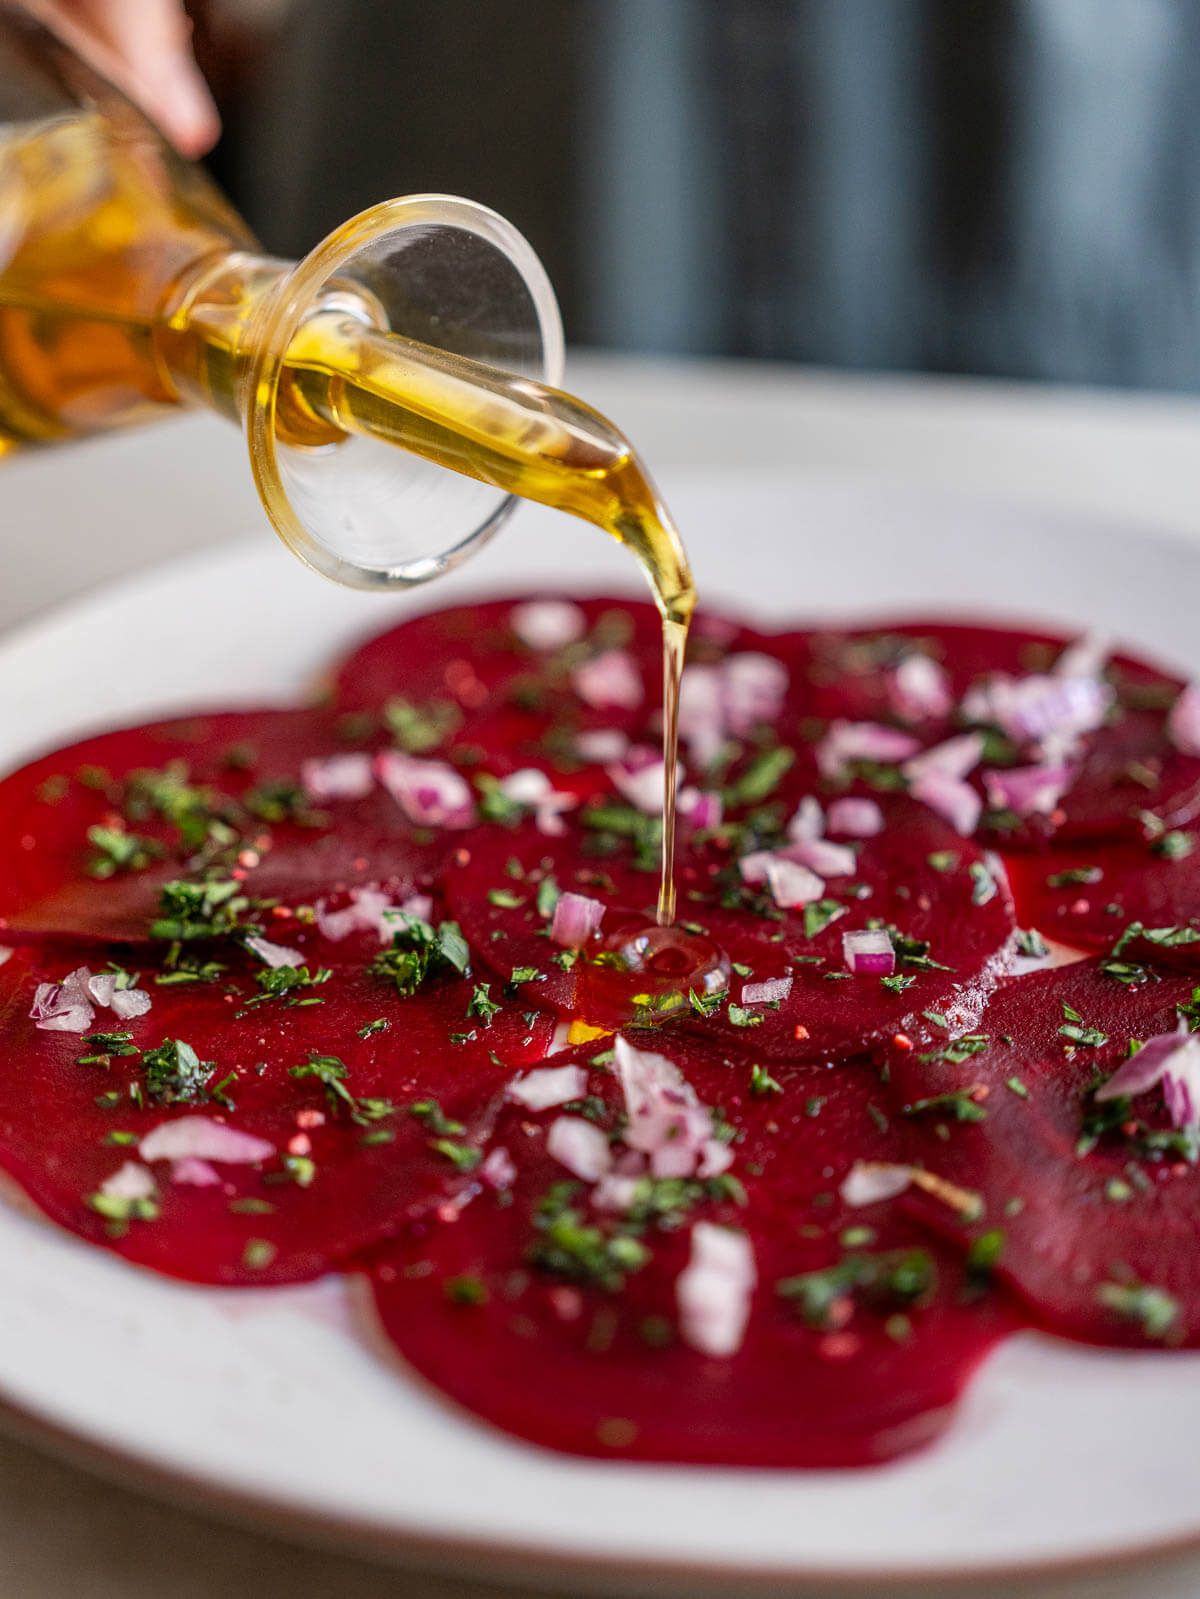 add oil to the carpaccio of beets.